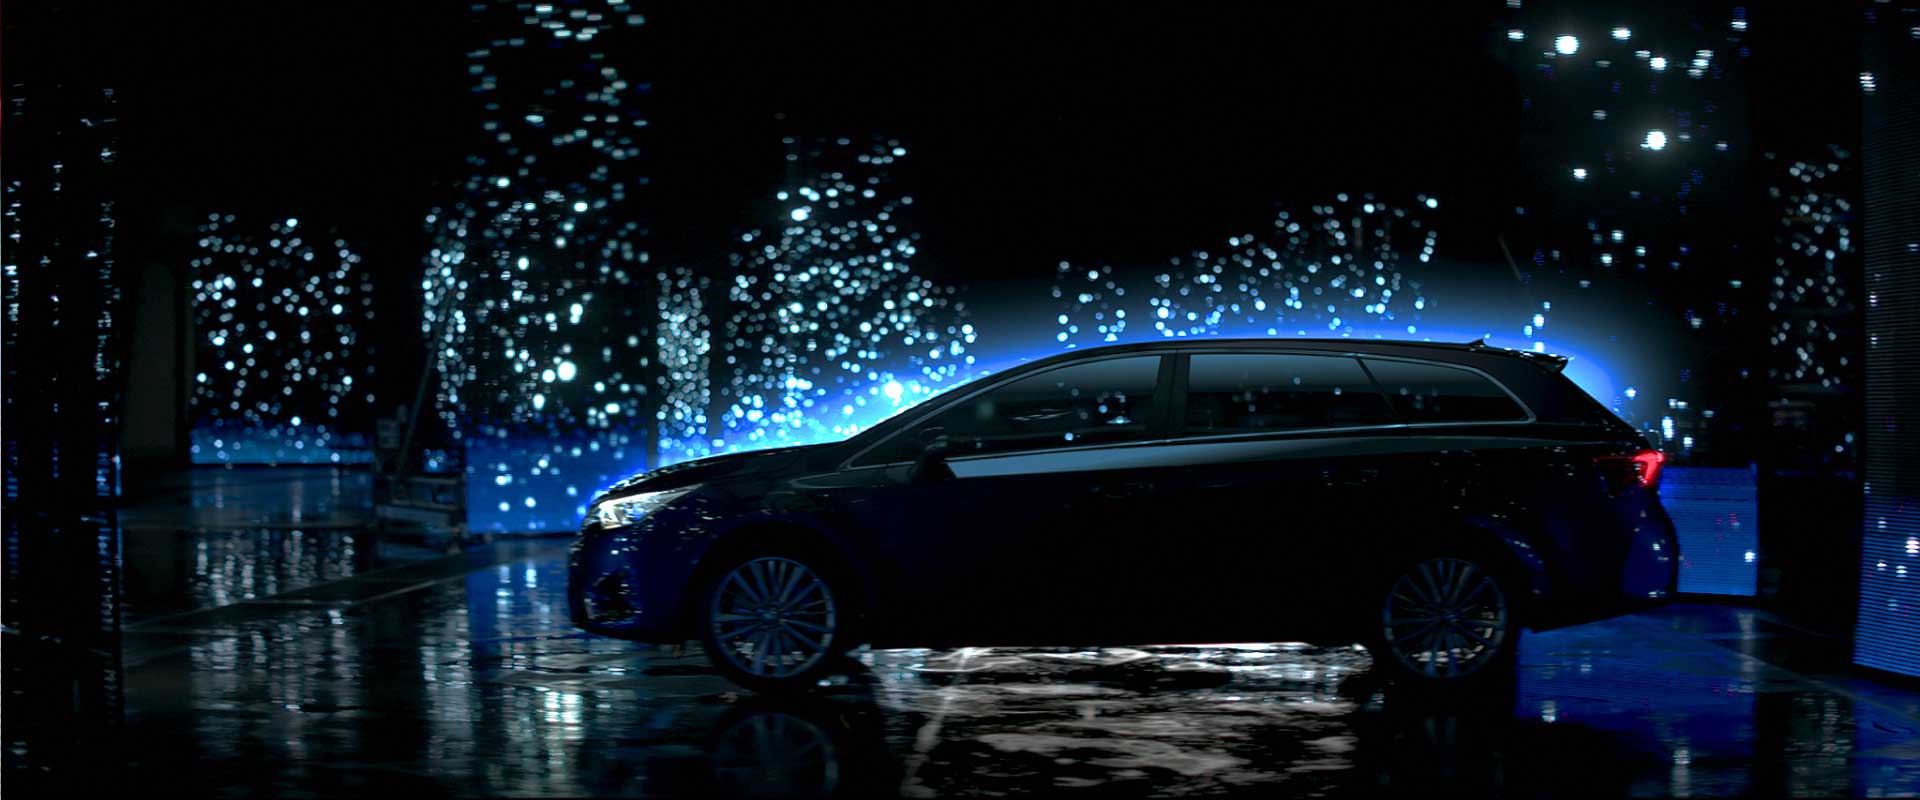 Sideview car. Still from Toyota Avensis - Commercial